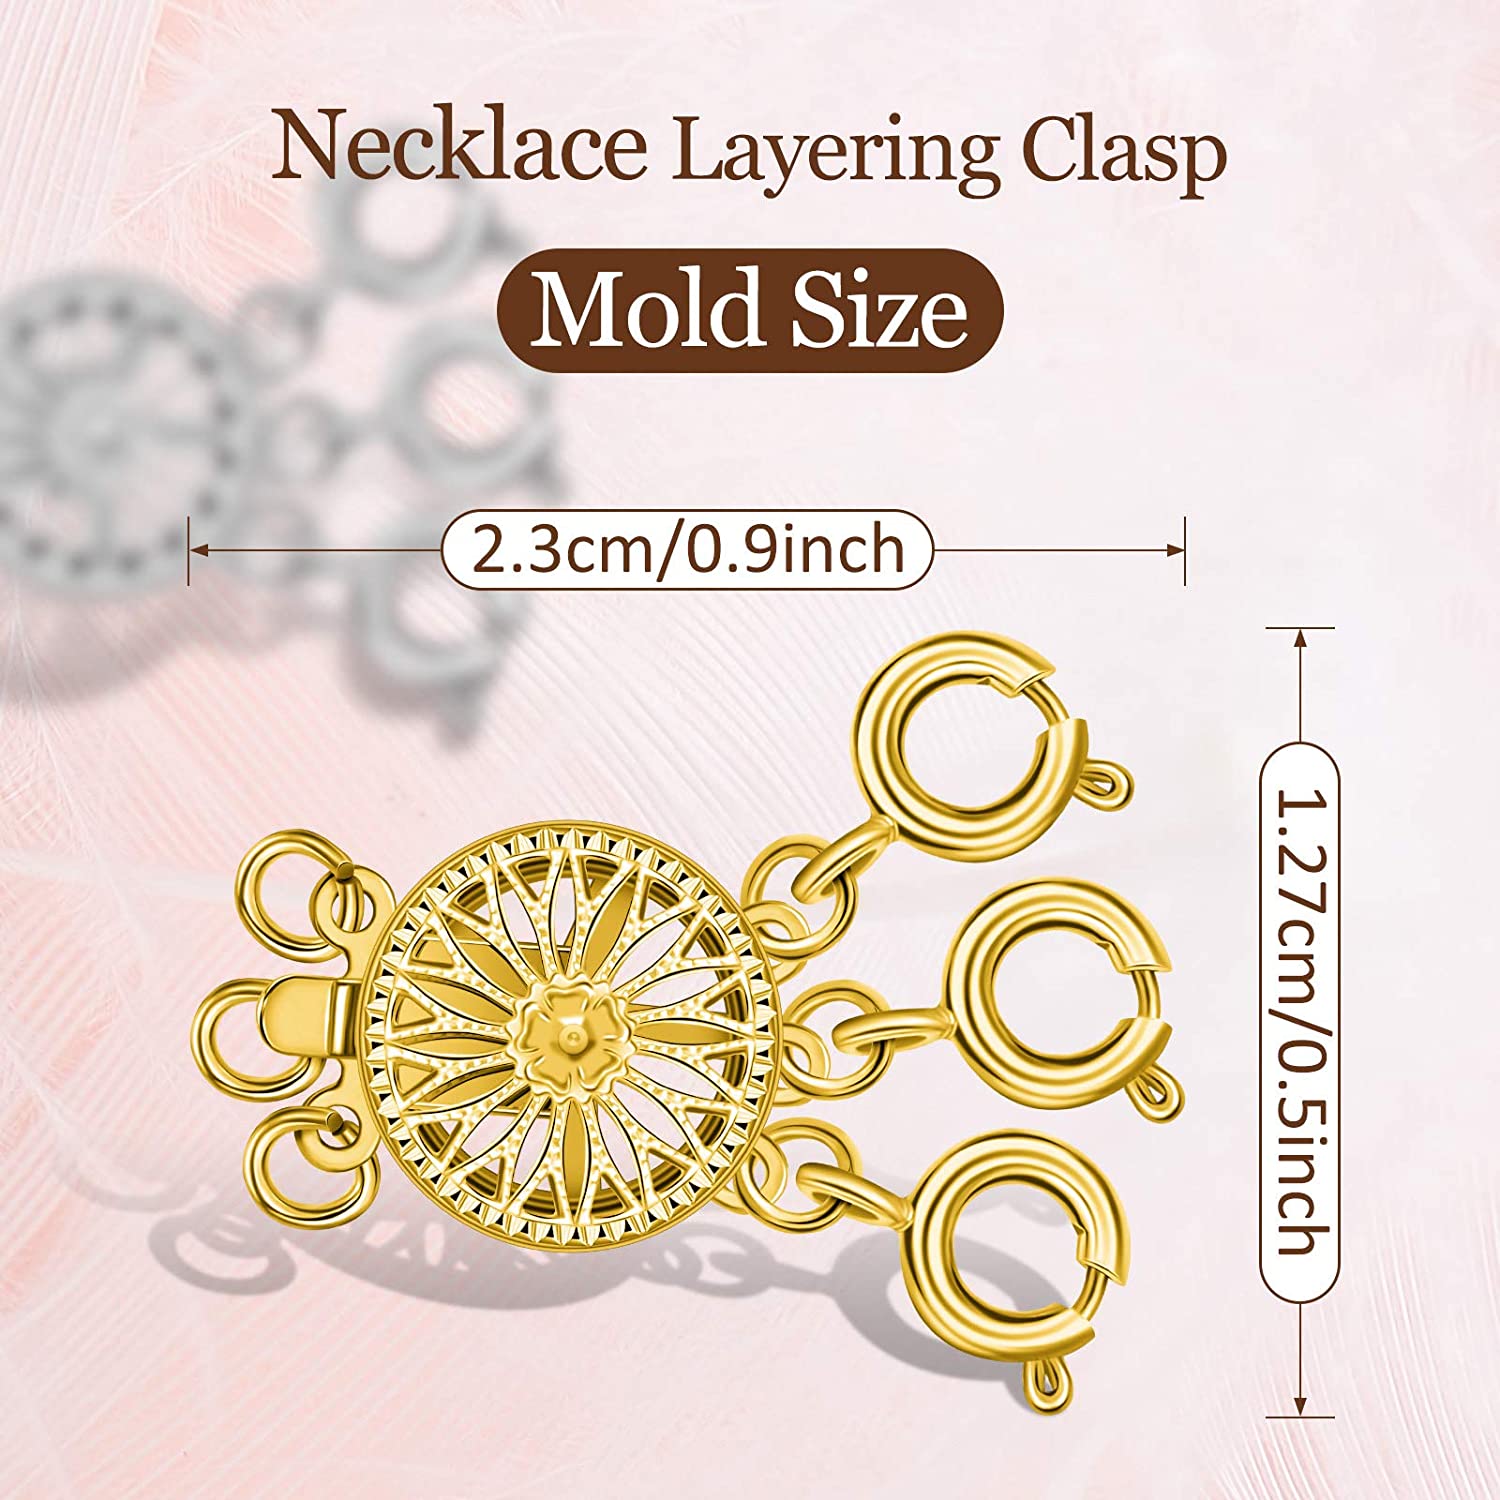 Slide Clasp Lock Necklace Layering Clasp 3 Layered Necklace Clasps Jewelry Bracelet Connectors Necklace Spacer Clasp for Bracelet Necklace Jewelry Crafts, Gold, Silver - image 2 of 7